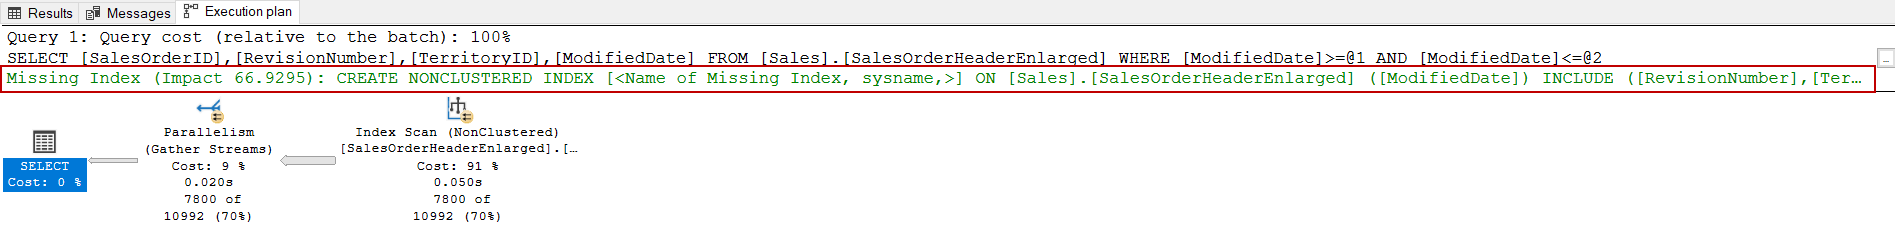 Execution plan of a query and SQL variable